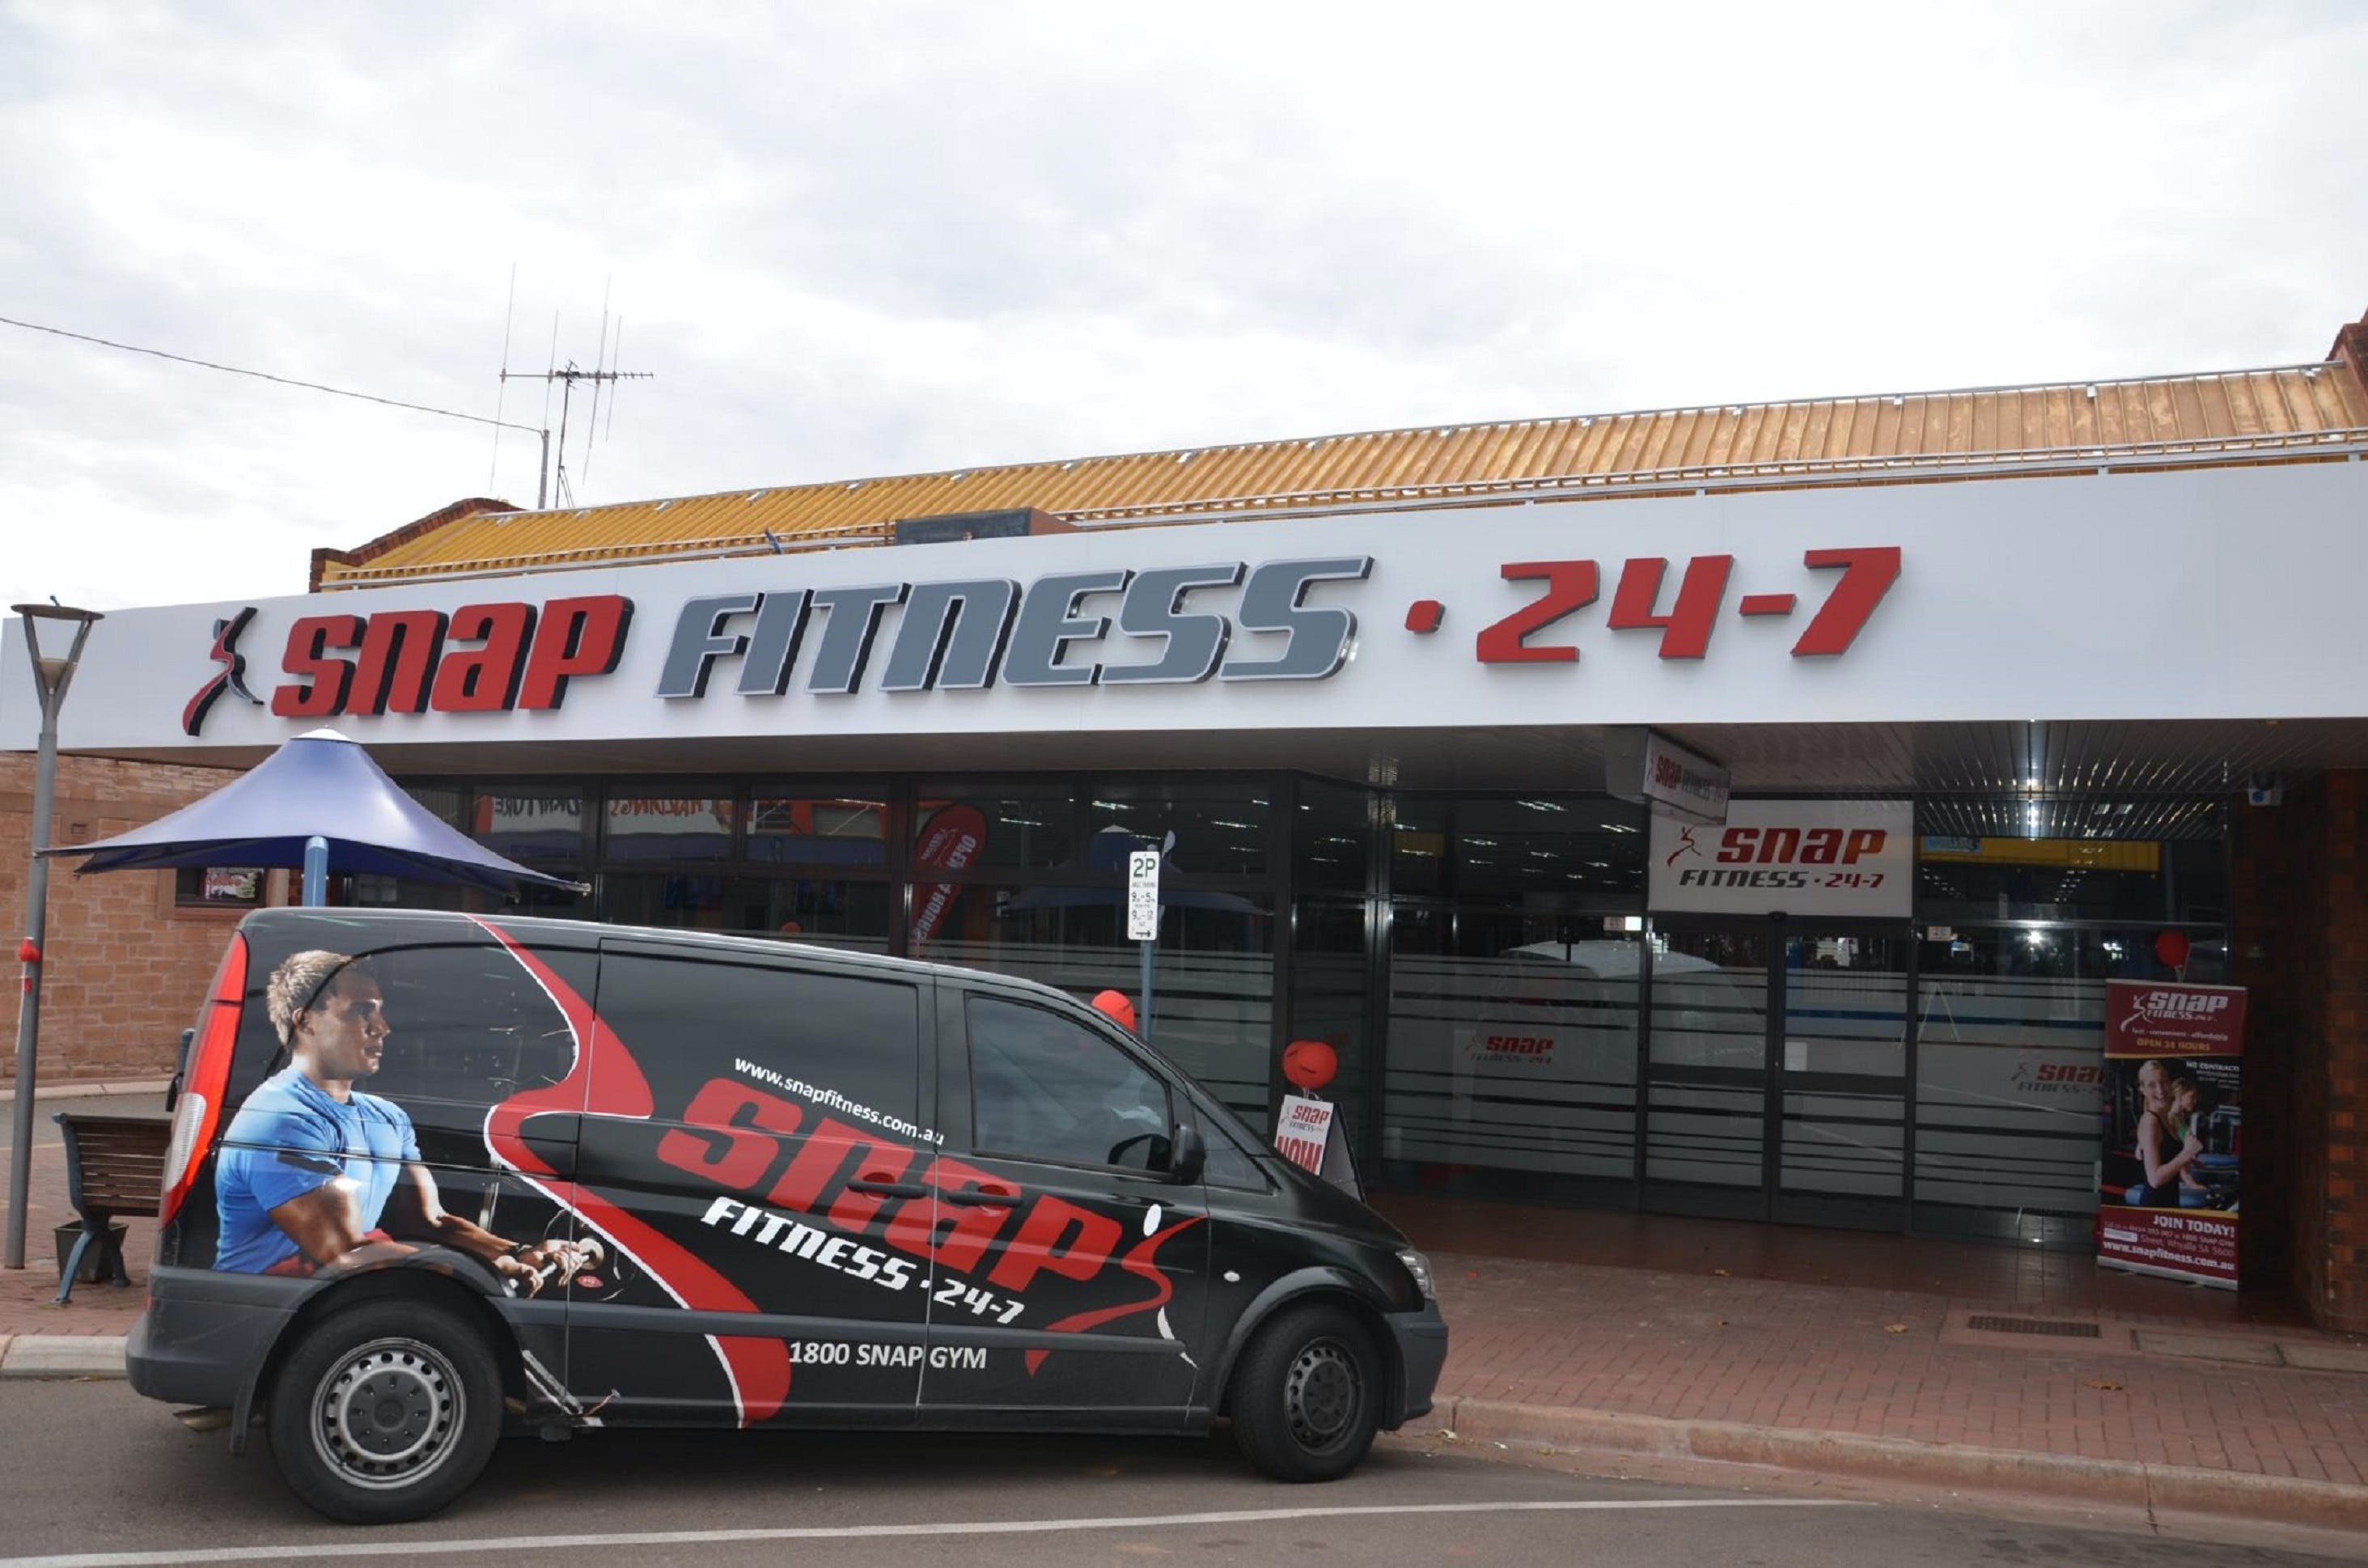 Snap Fitness Whyalla 24/7 gym - Accommodation Adelaide